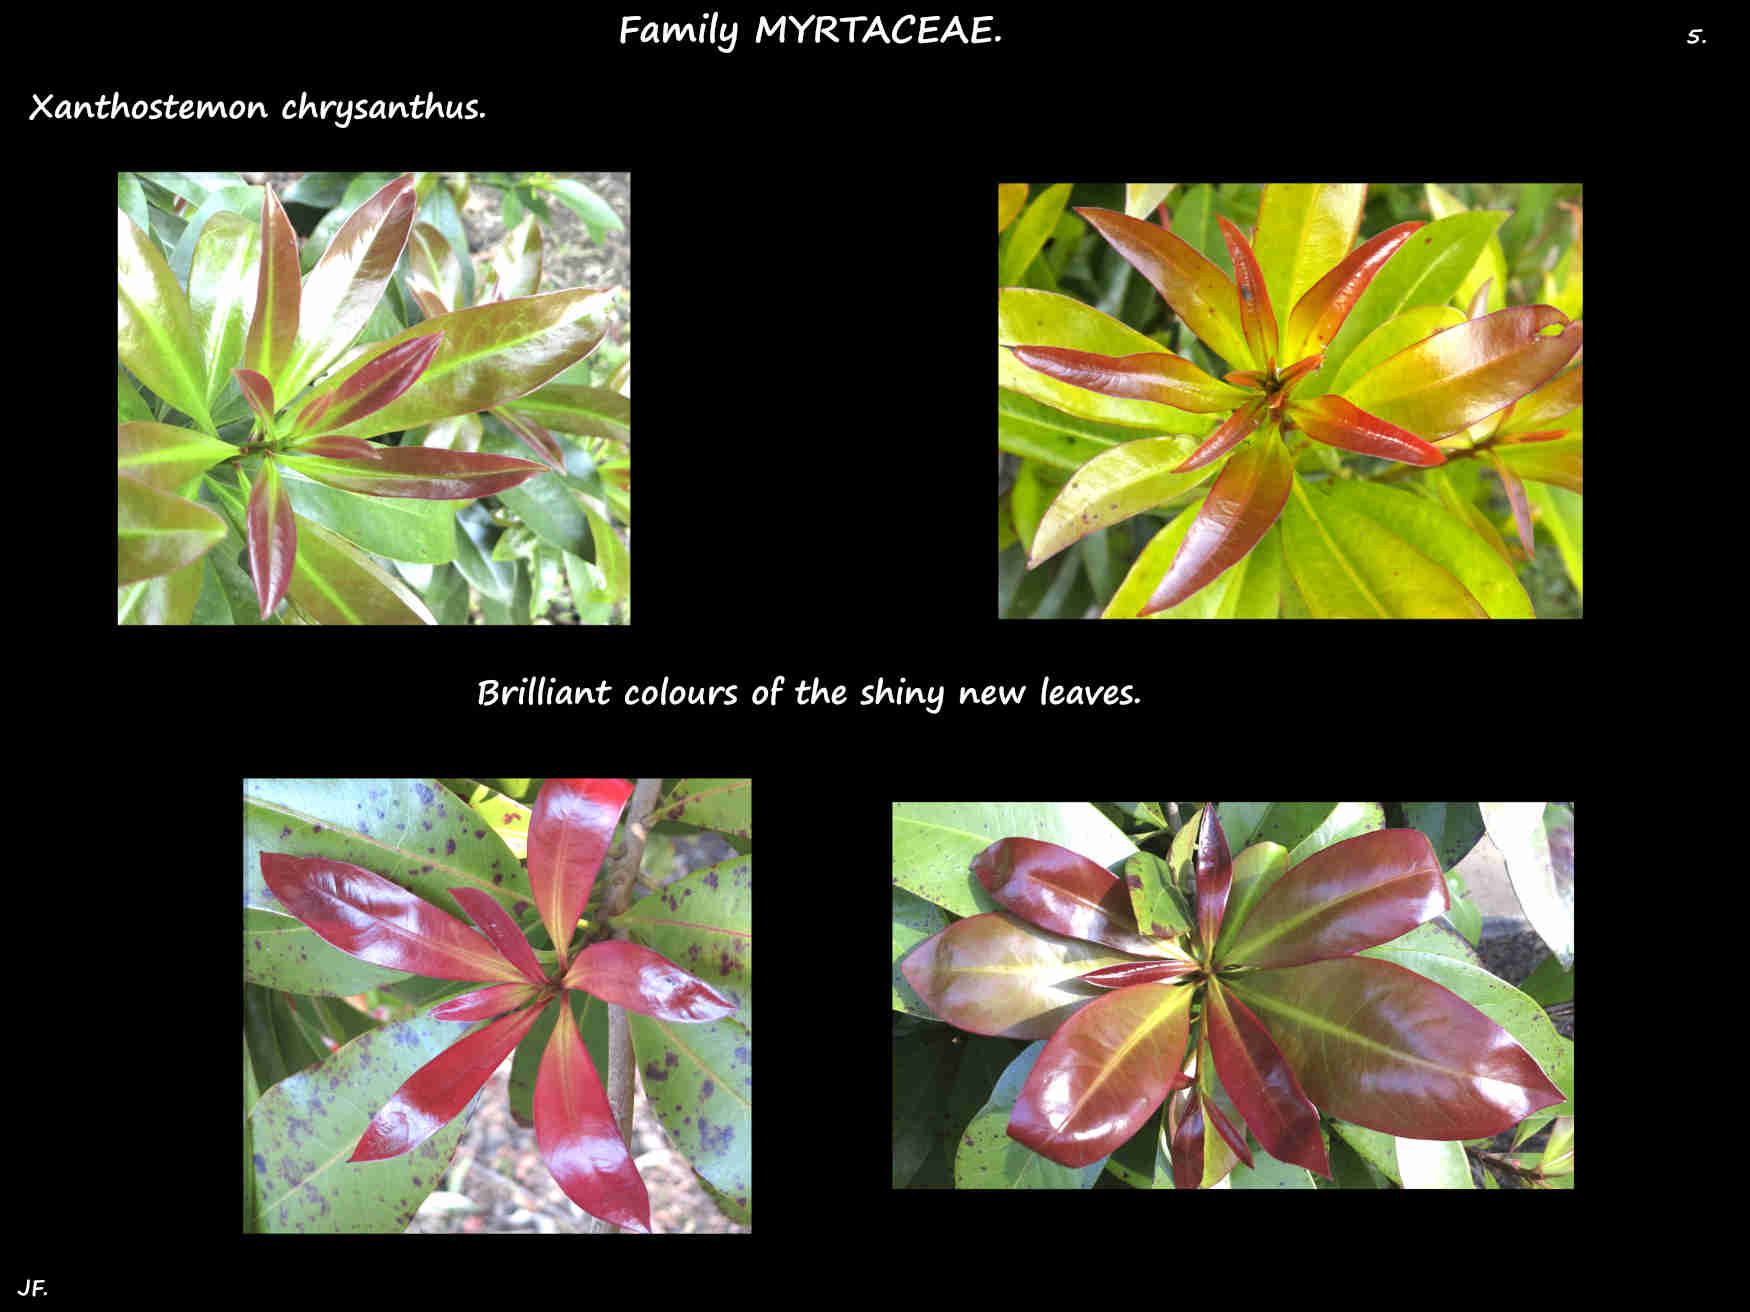 5 Red & bronze new leaves of Xanthostemon chrysanthus